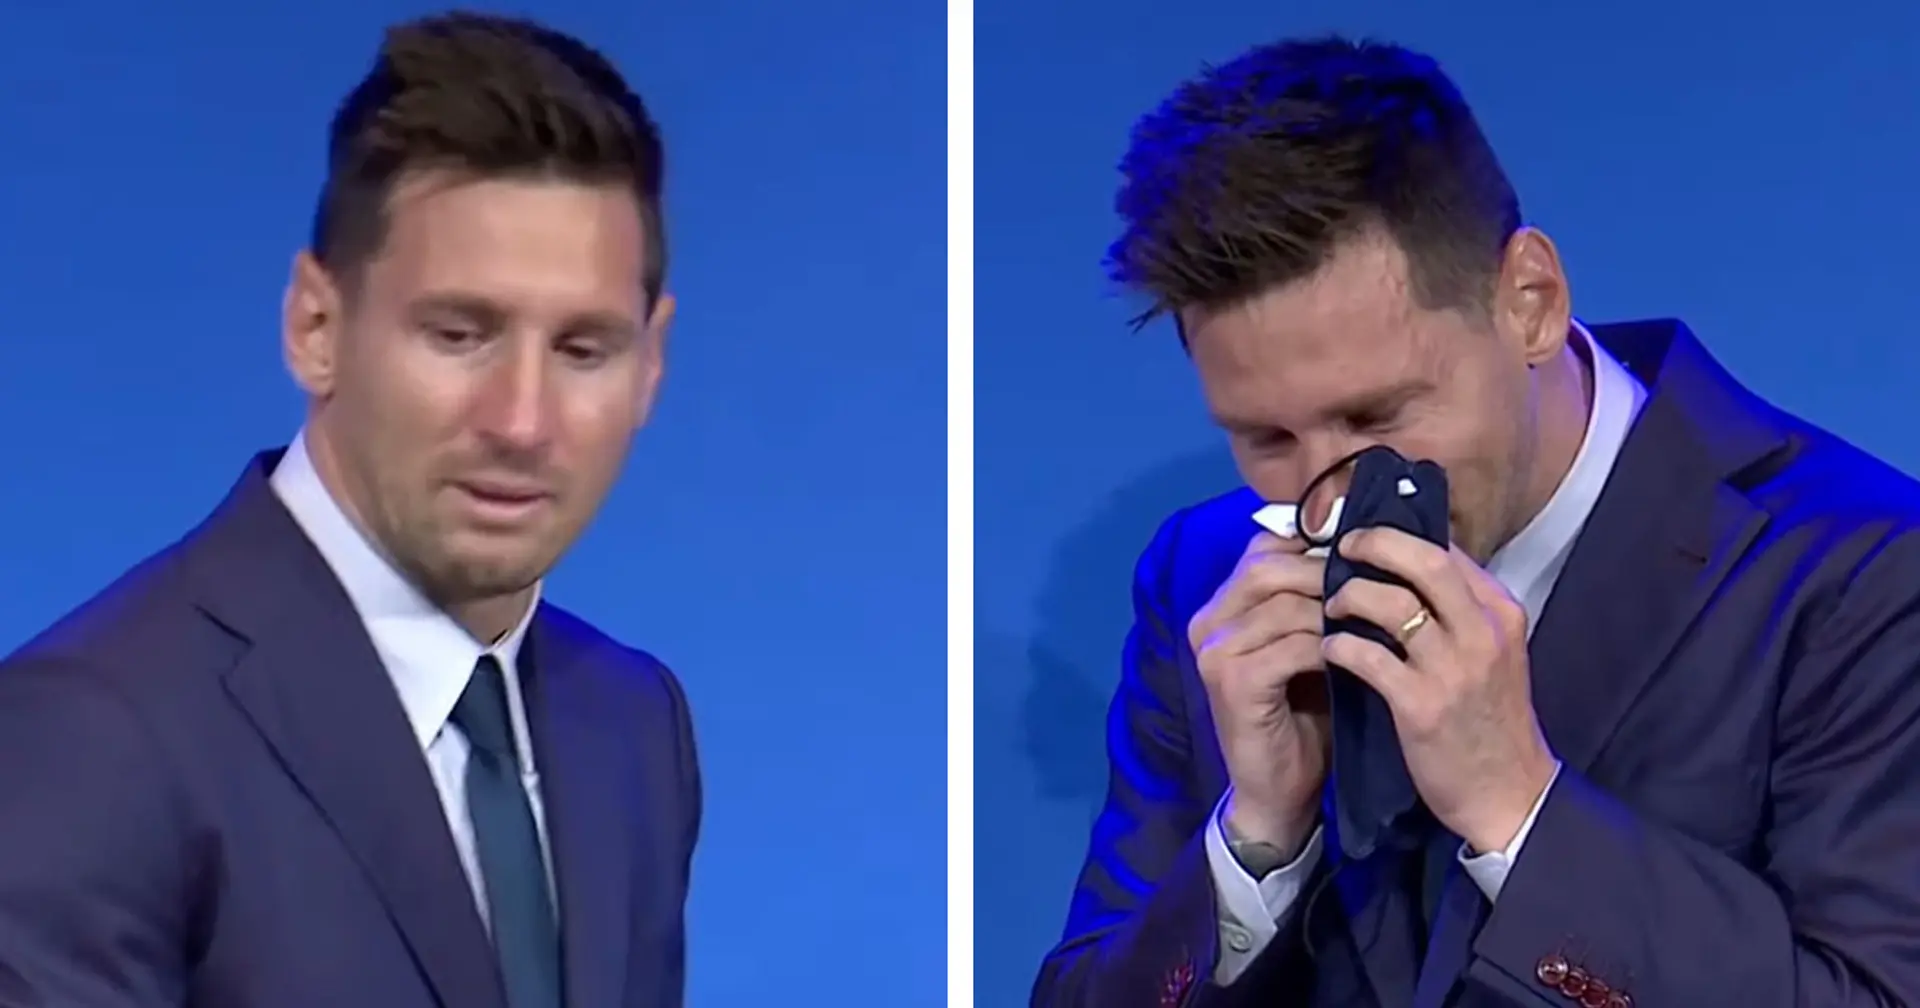 Messi starts crying even before start of press conference